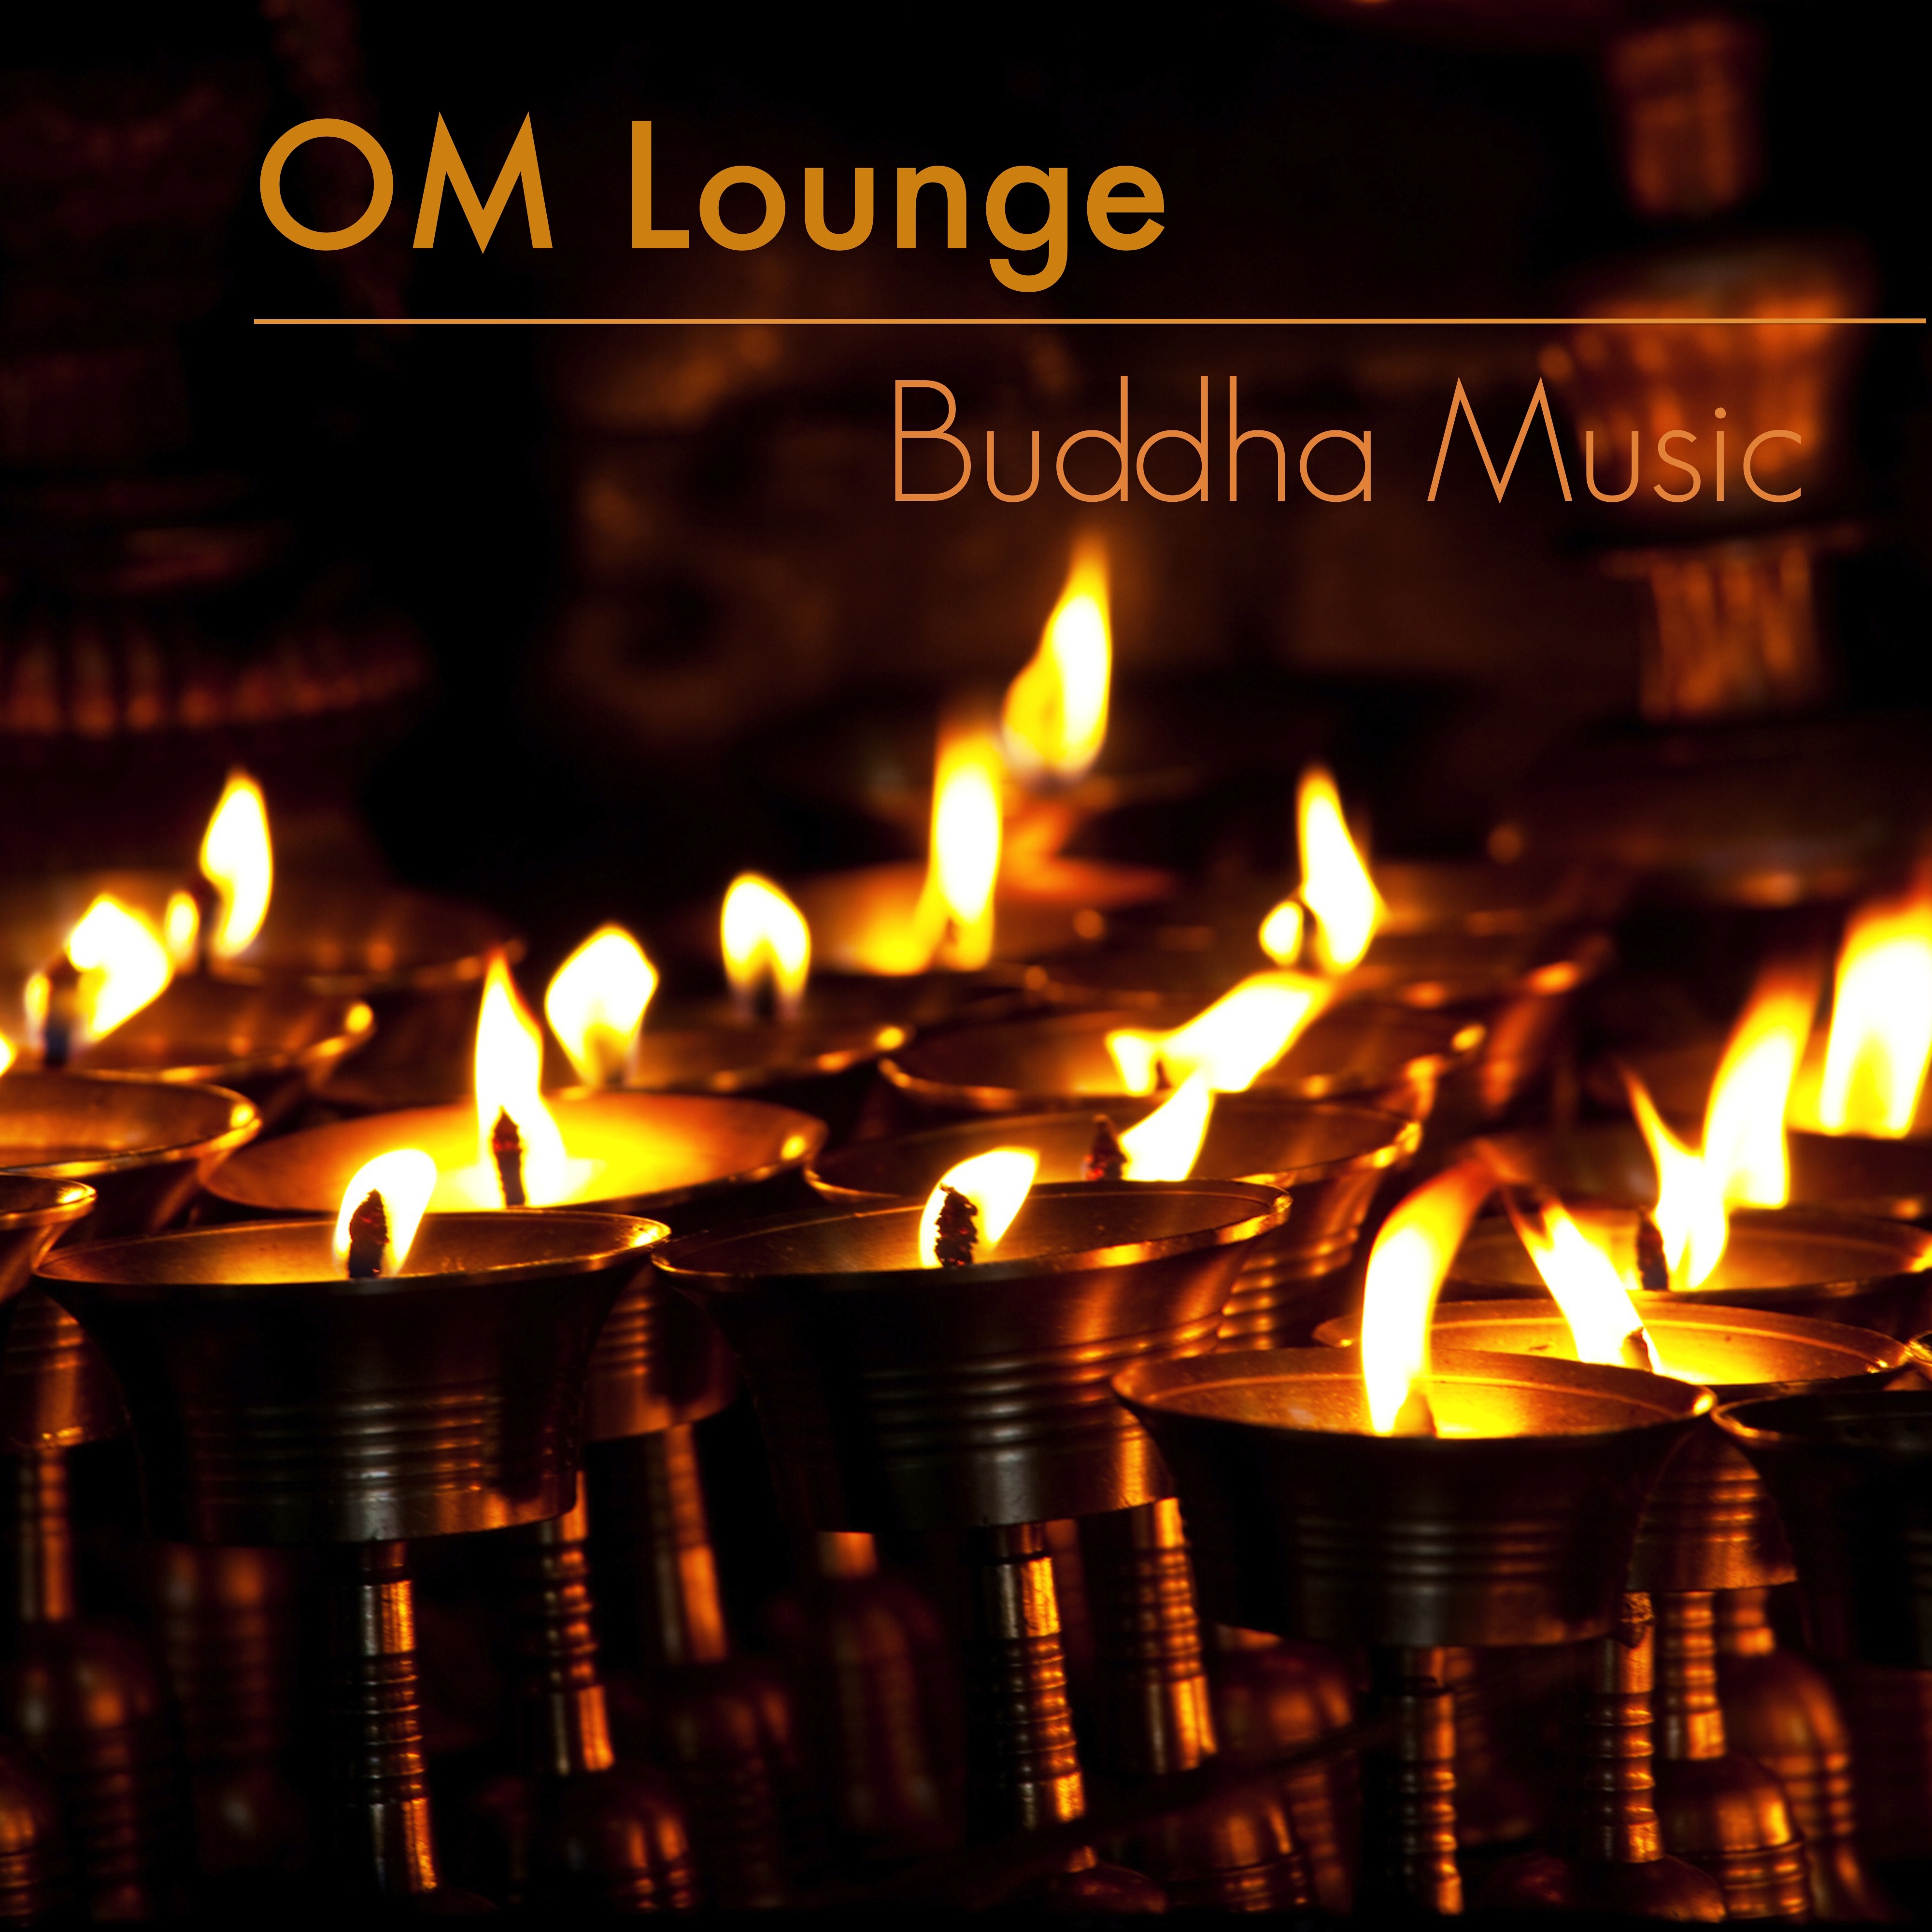 Om Lounge Buddha Music  Om Meditation Oriental Lounge  Chillout Music at India Cafe